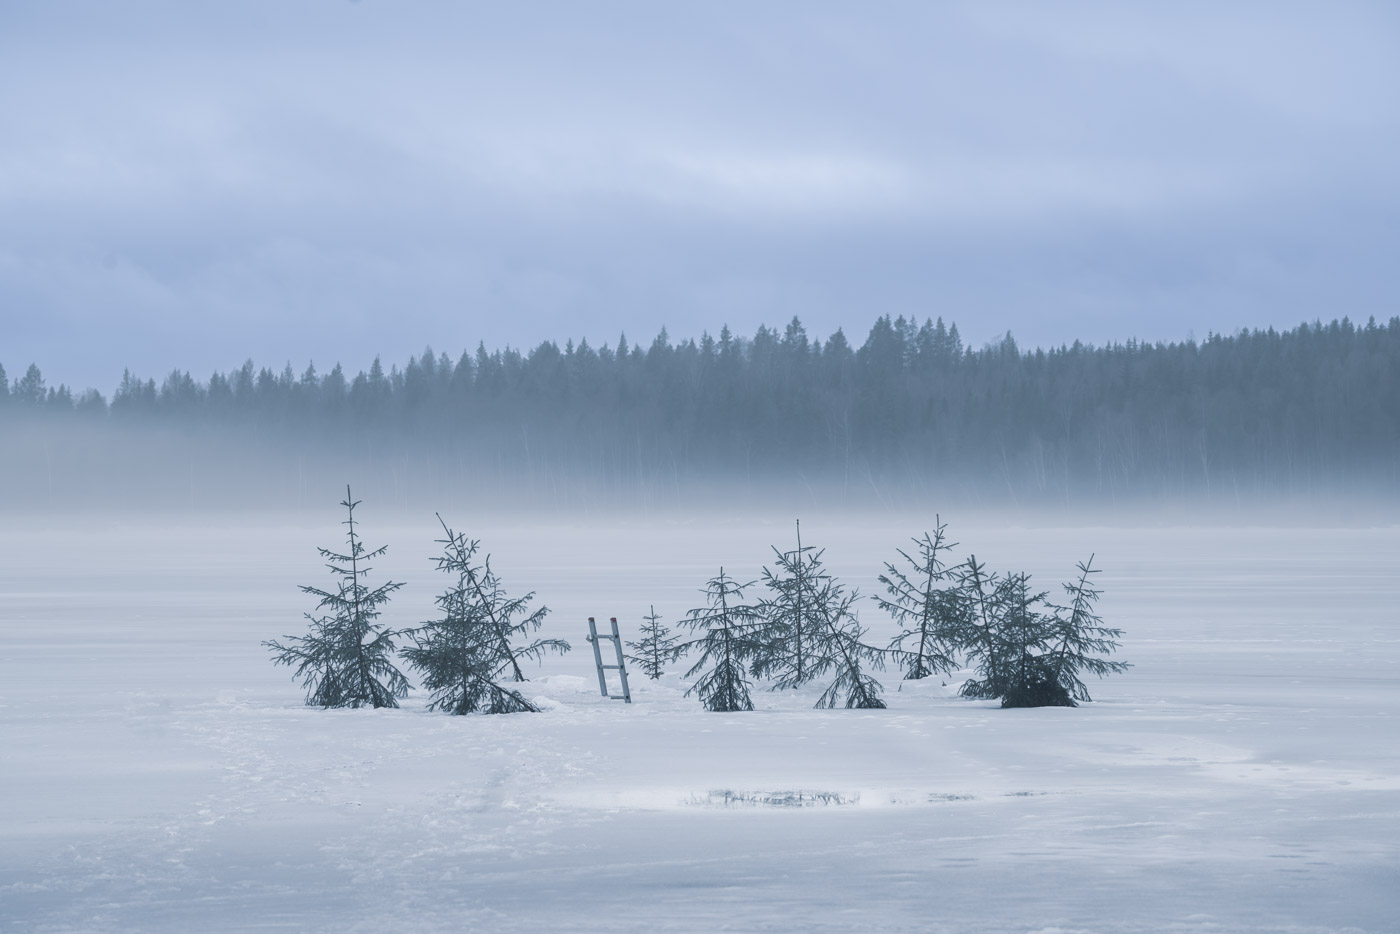 A ladder on a frozen lake in Sweden surrounded by little spruce trees emerging from the icy water